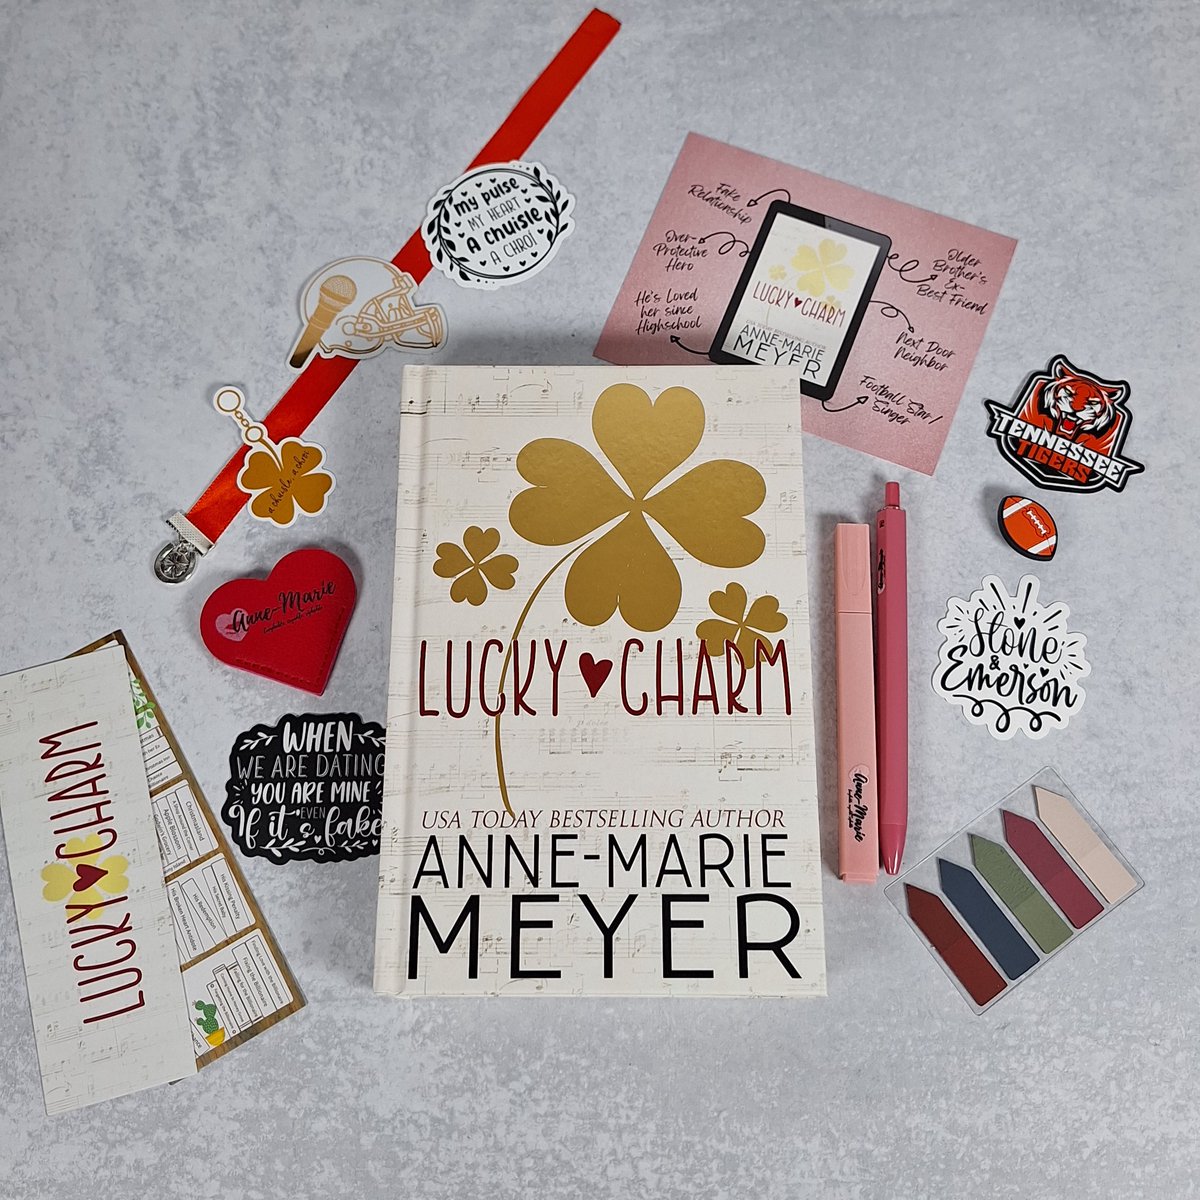 “When we’re dating, you are mine. Even if it’s fake.” Lucky Charm by Anne-Marie Meyer bit.ly/3wbHEp1 Thank you, Anne-Marie Meyer, for the #bookmail #gifted #luckycharmbook #annemariemeyerauthor